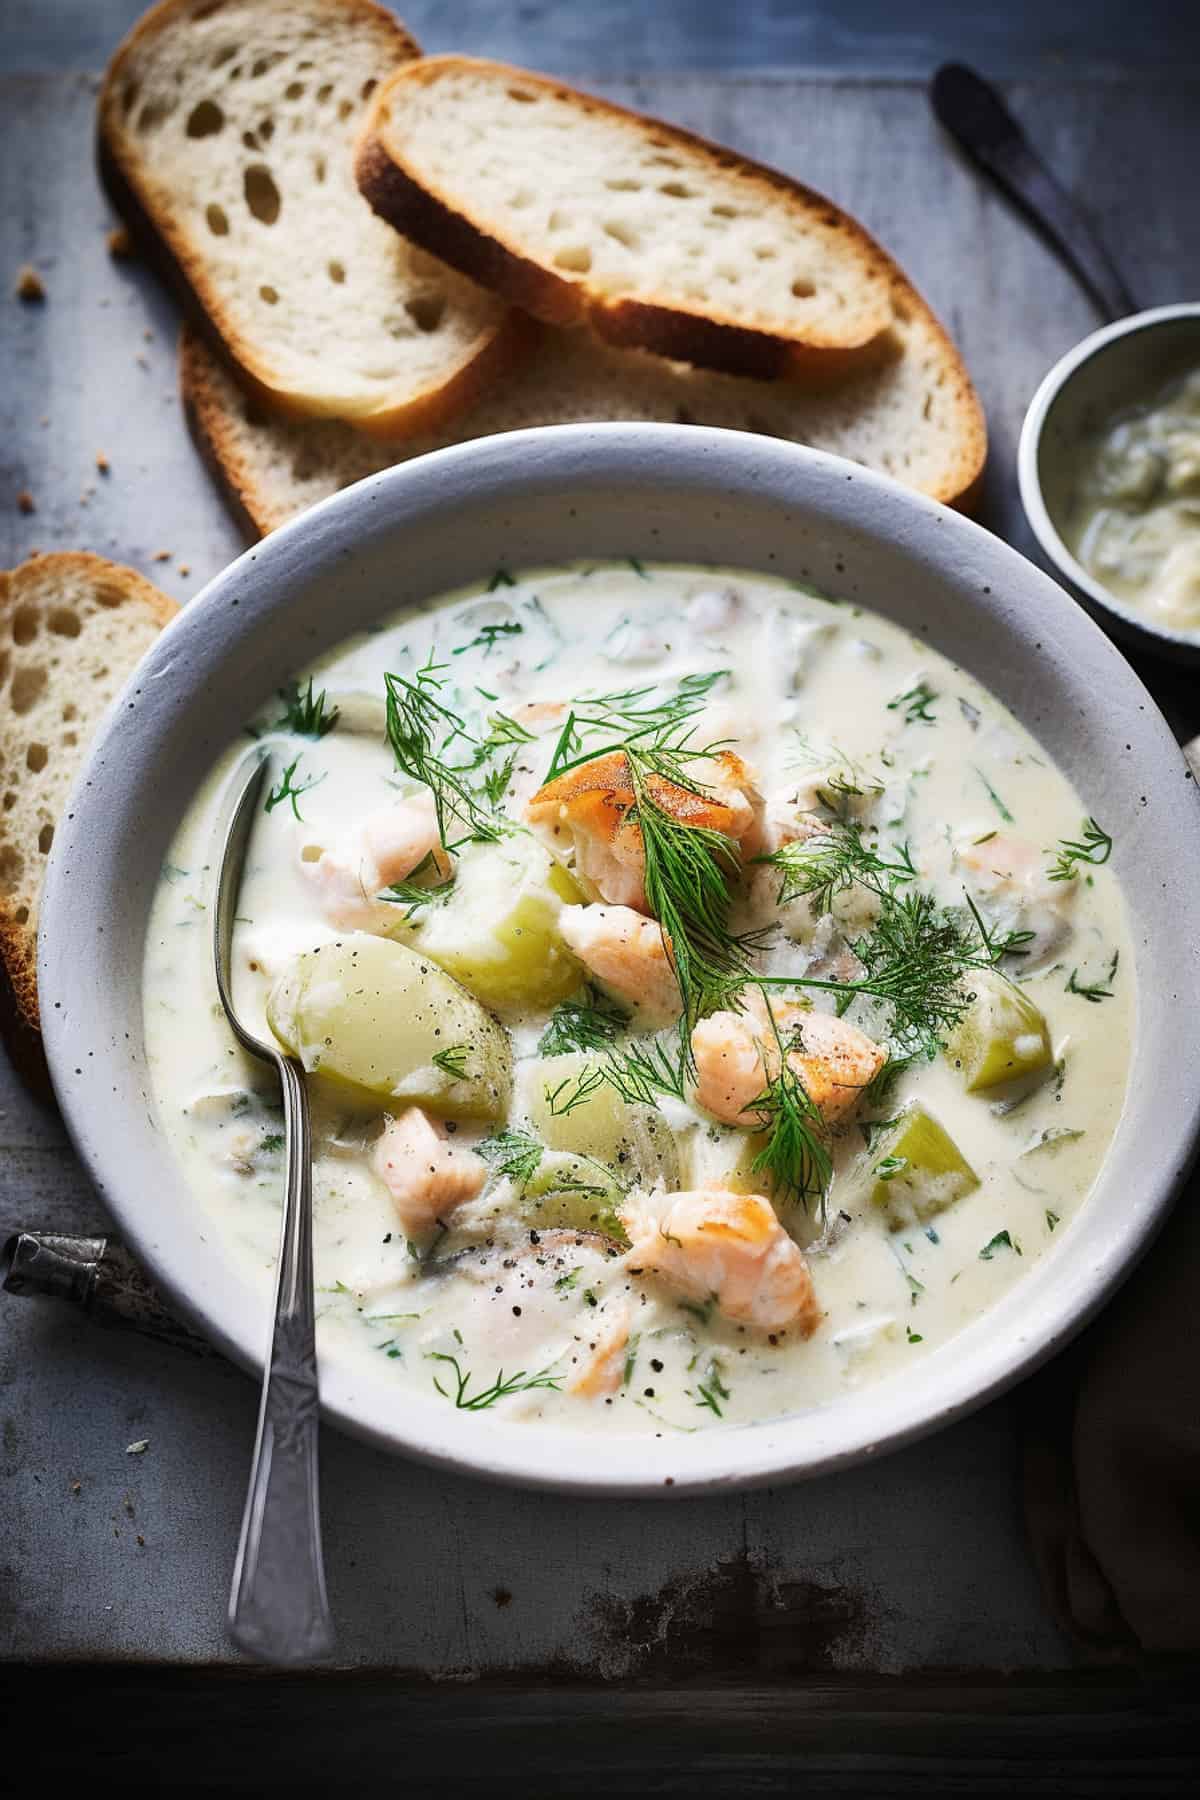 Seafood chowder with potatoes and herbs.